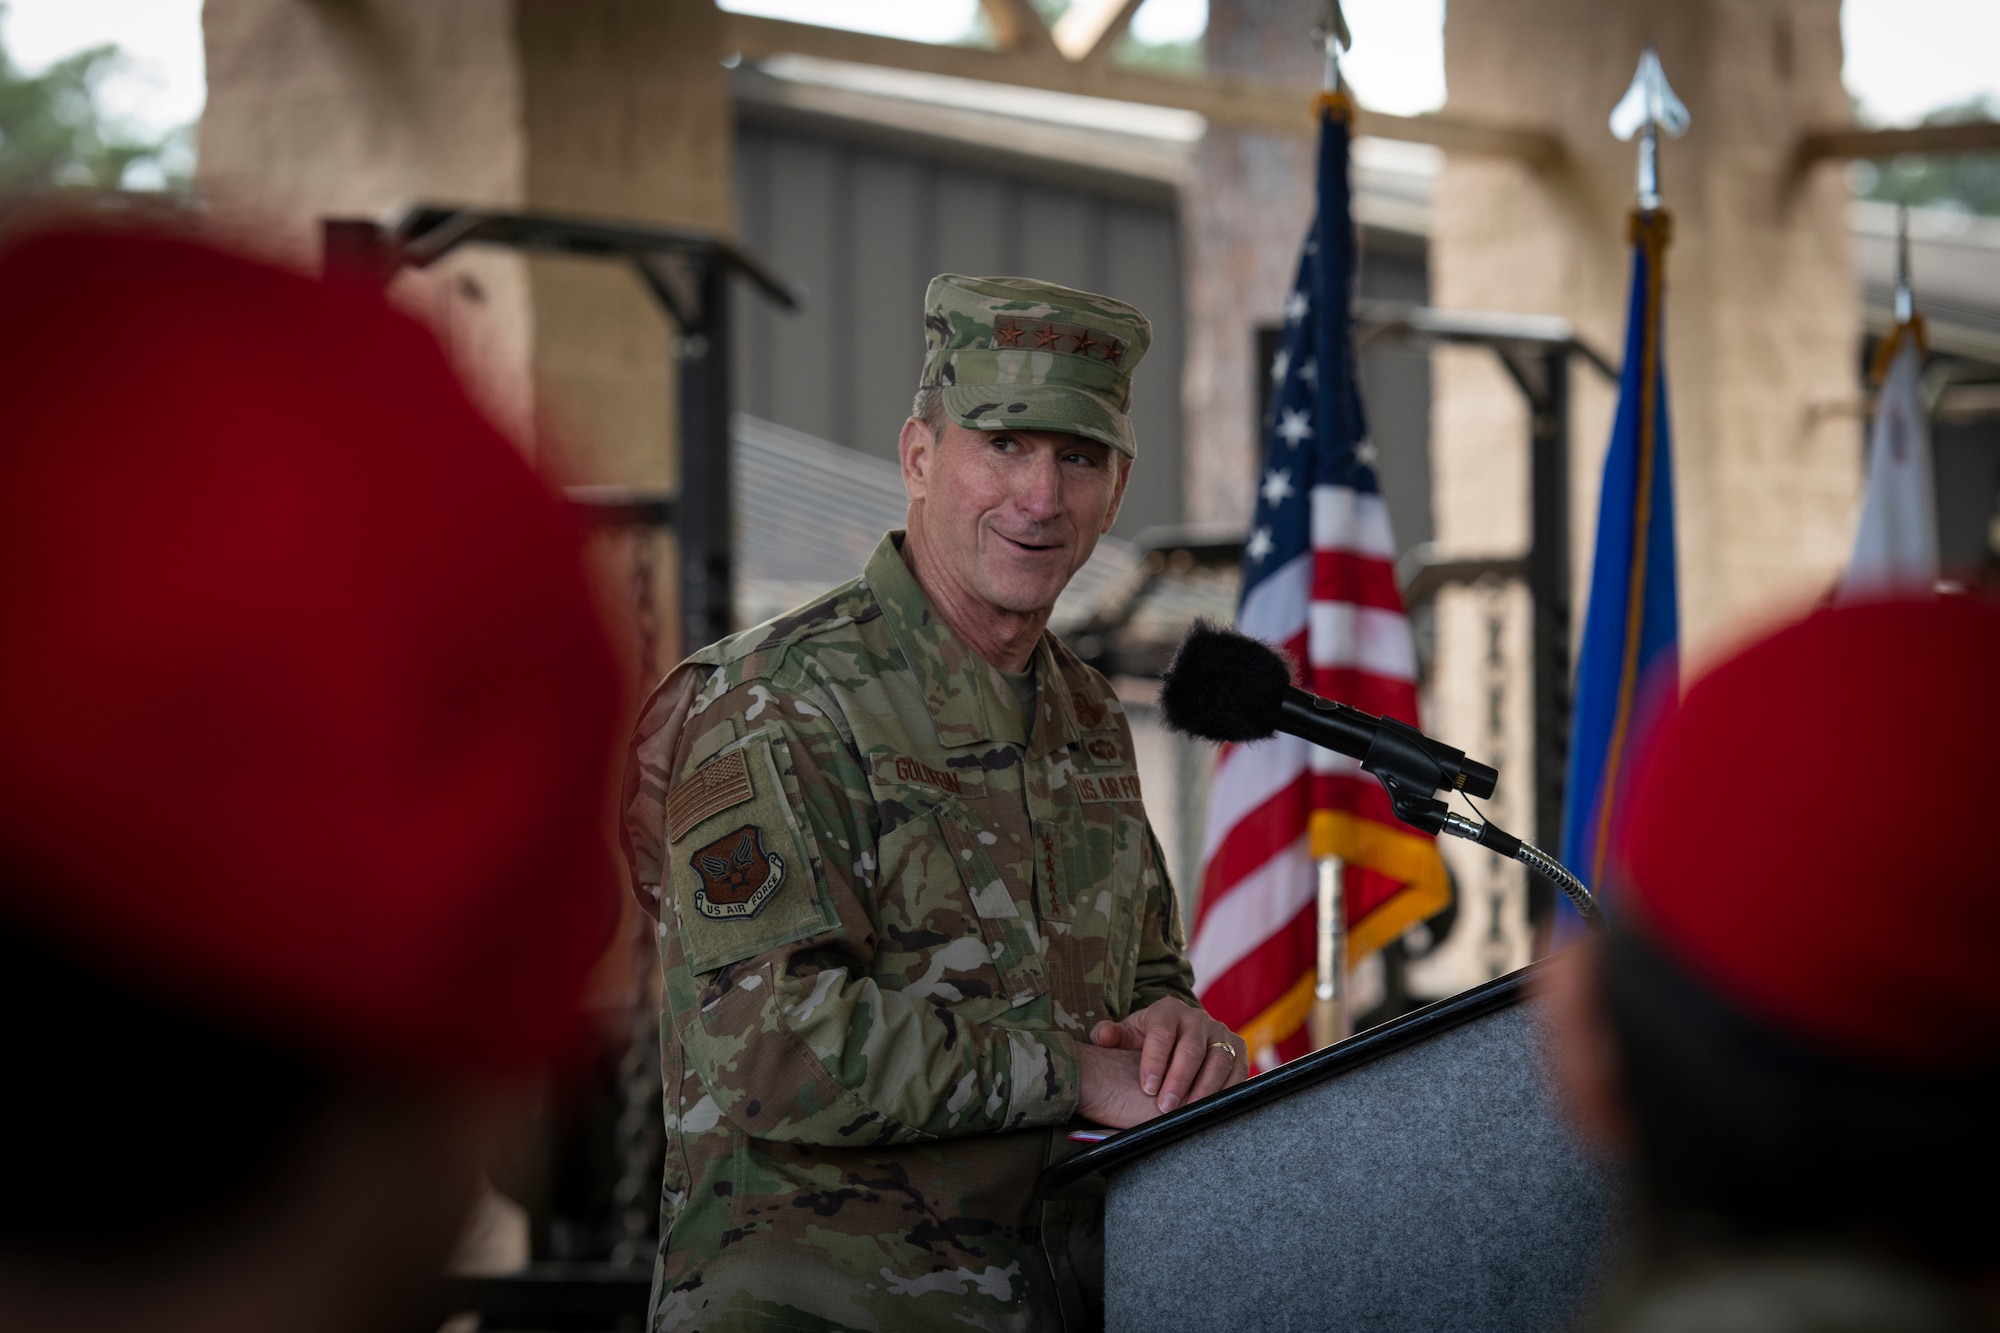 Air Force Chief of Staff Gen. David L. Goldfein gives remarks during the Special Tactics Ruck March Memorial Ceremony at Hurlburt Field, Florida, March 4, 2018.